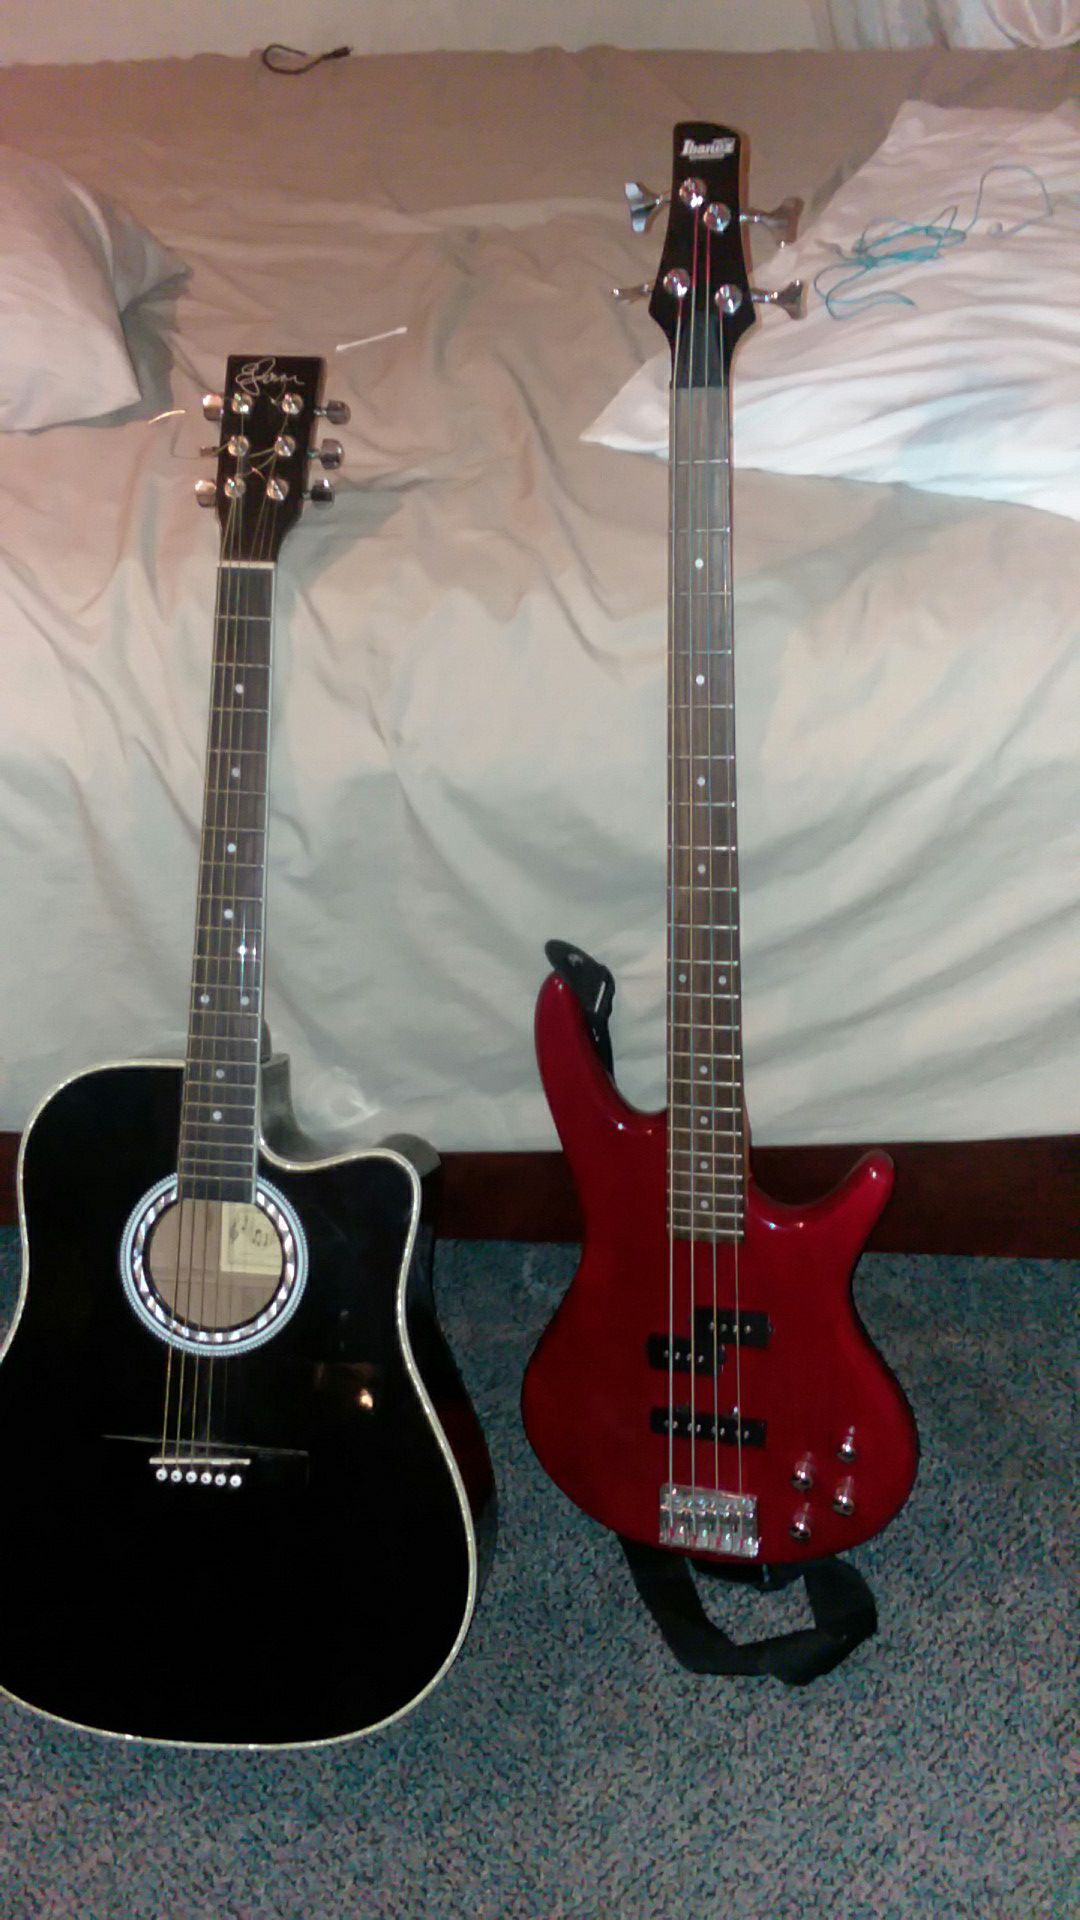 Bass guitar and acoustic